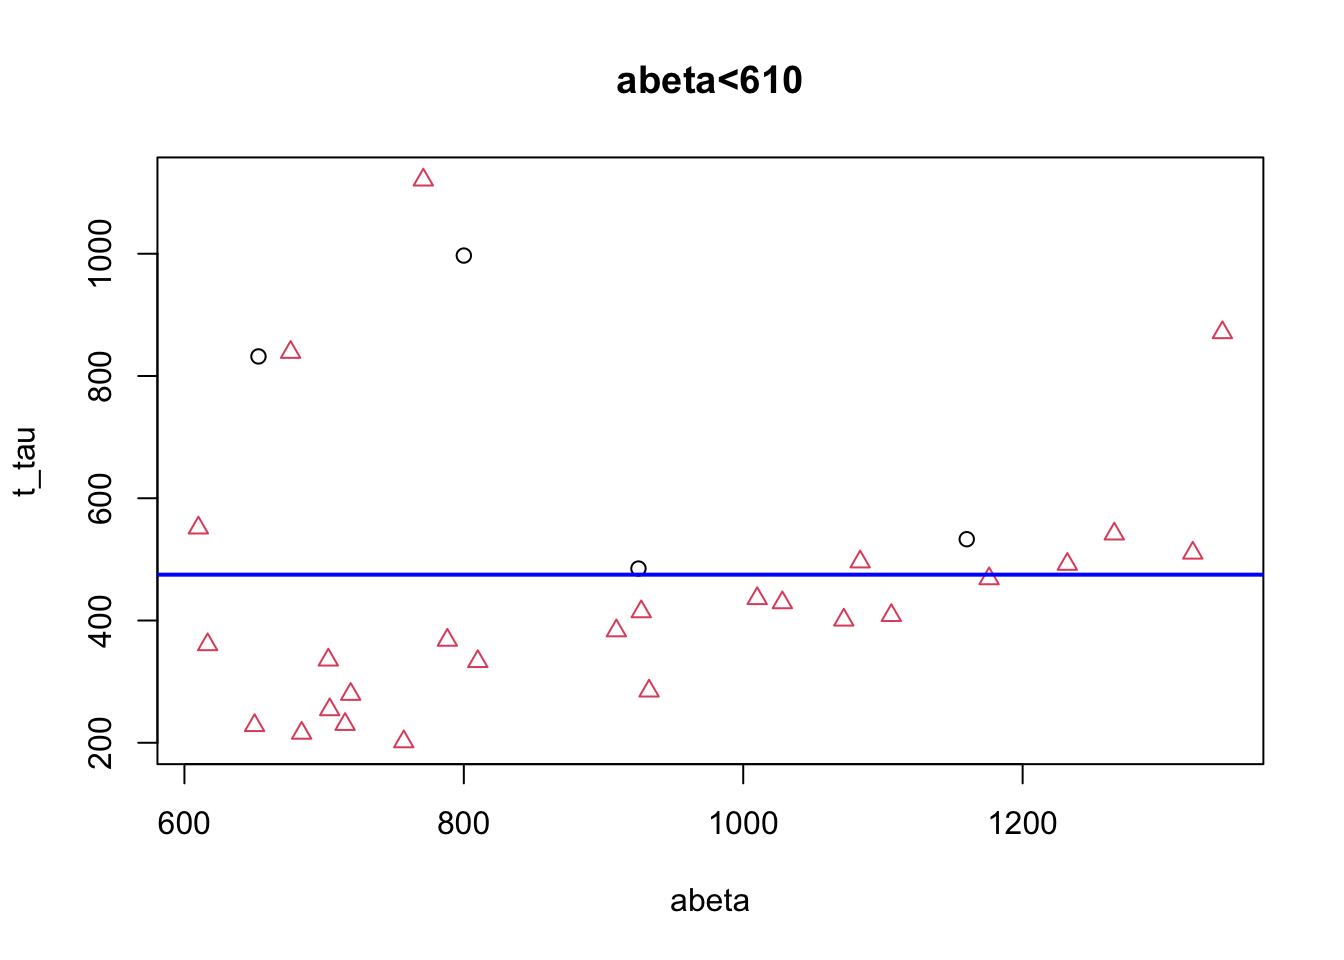 The example of two variables measured on a number of samples. Cut on abeta=610.